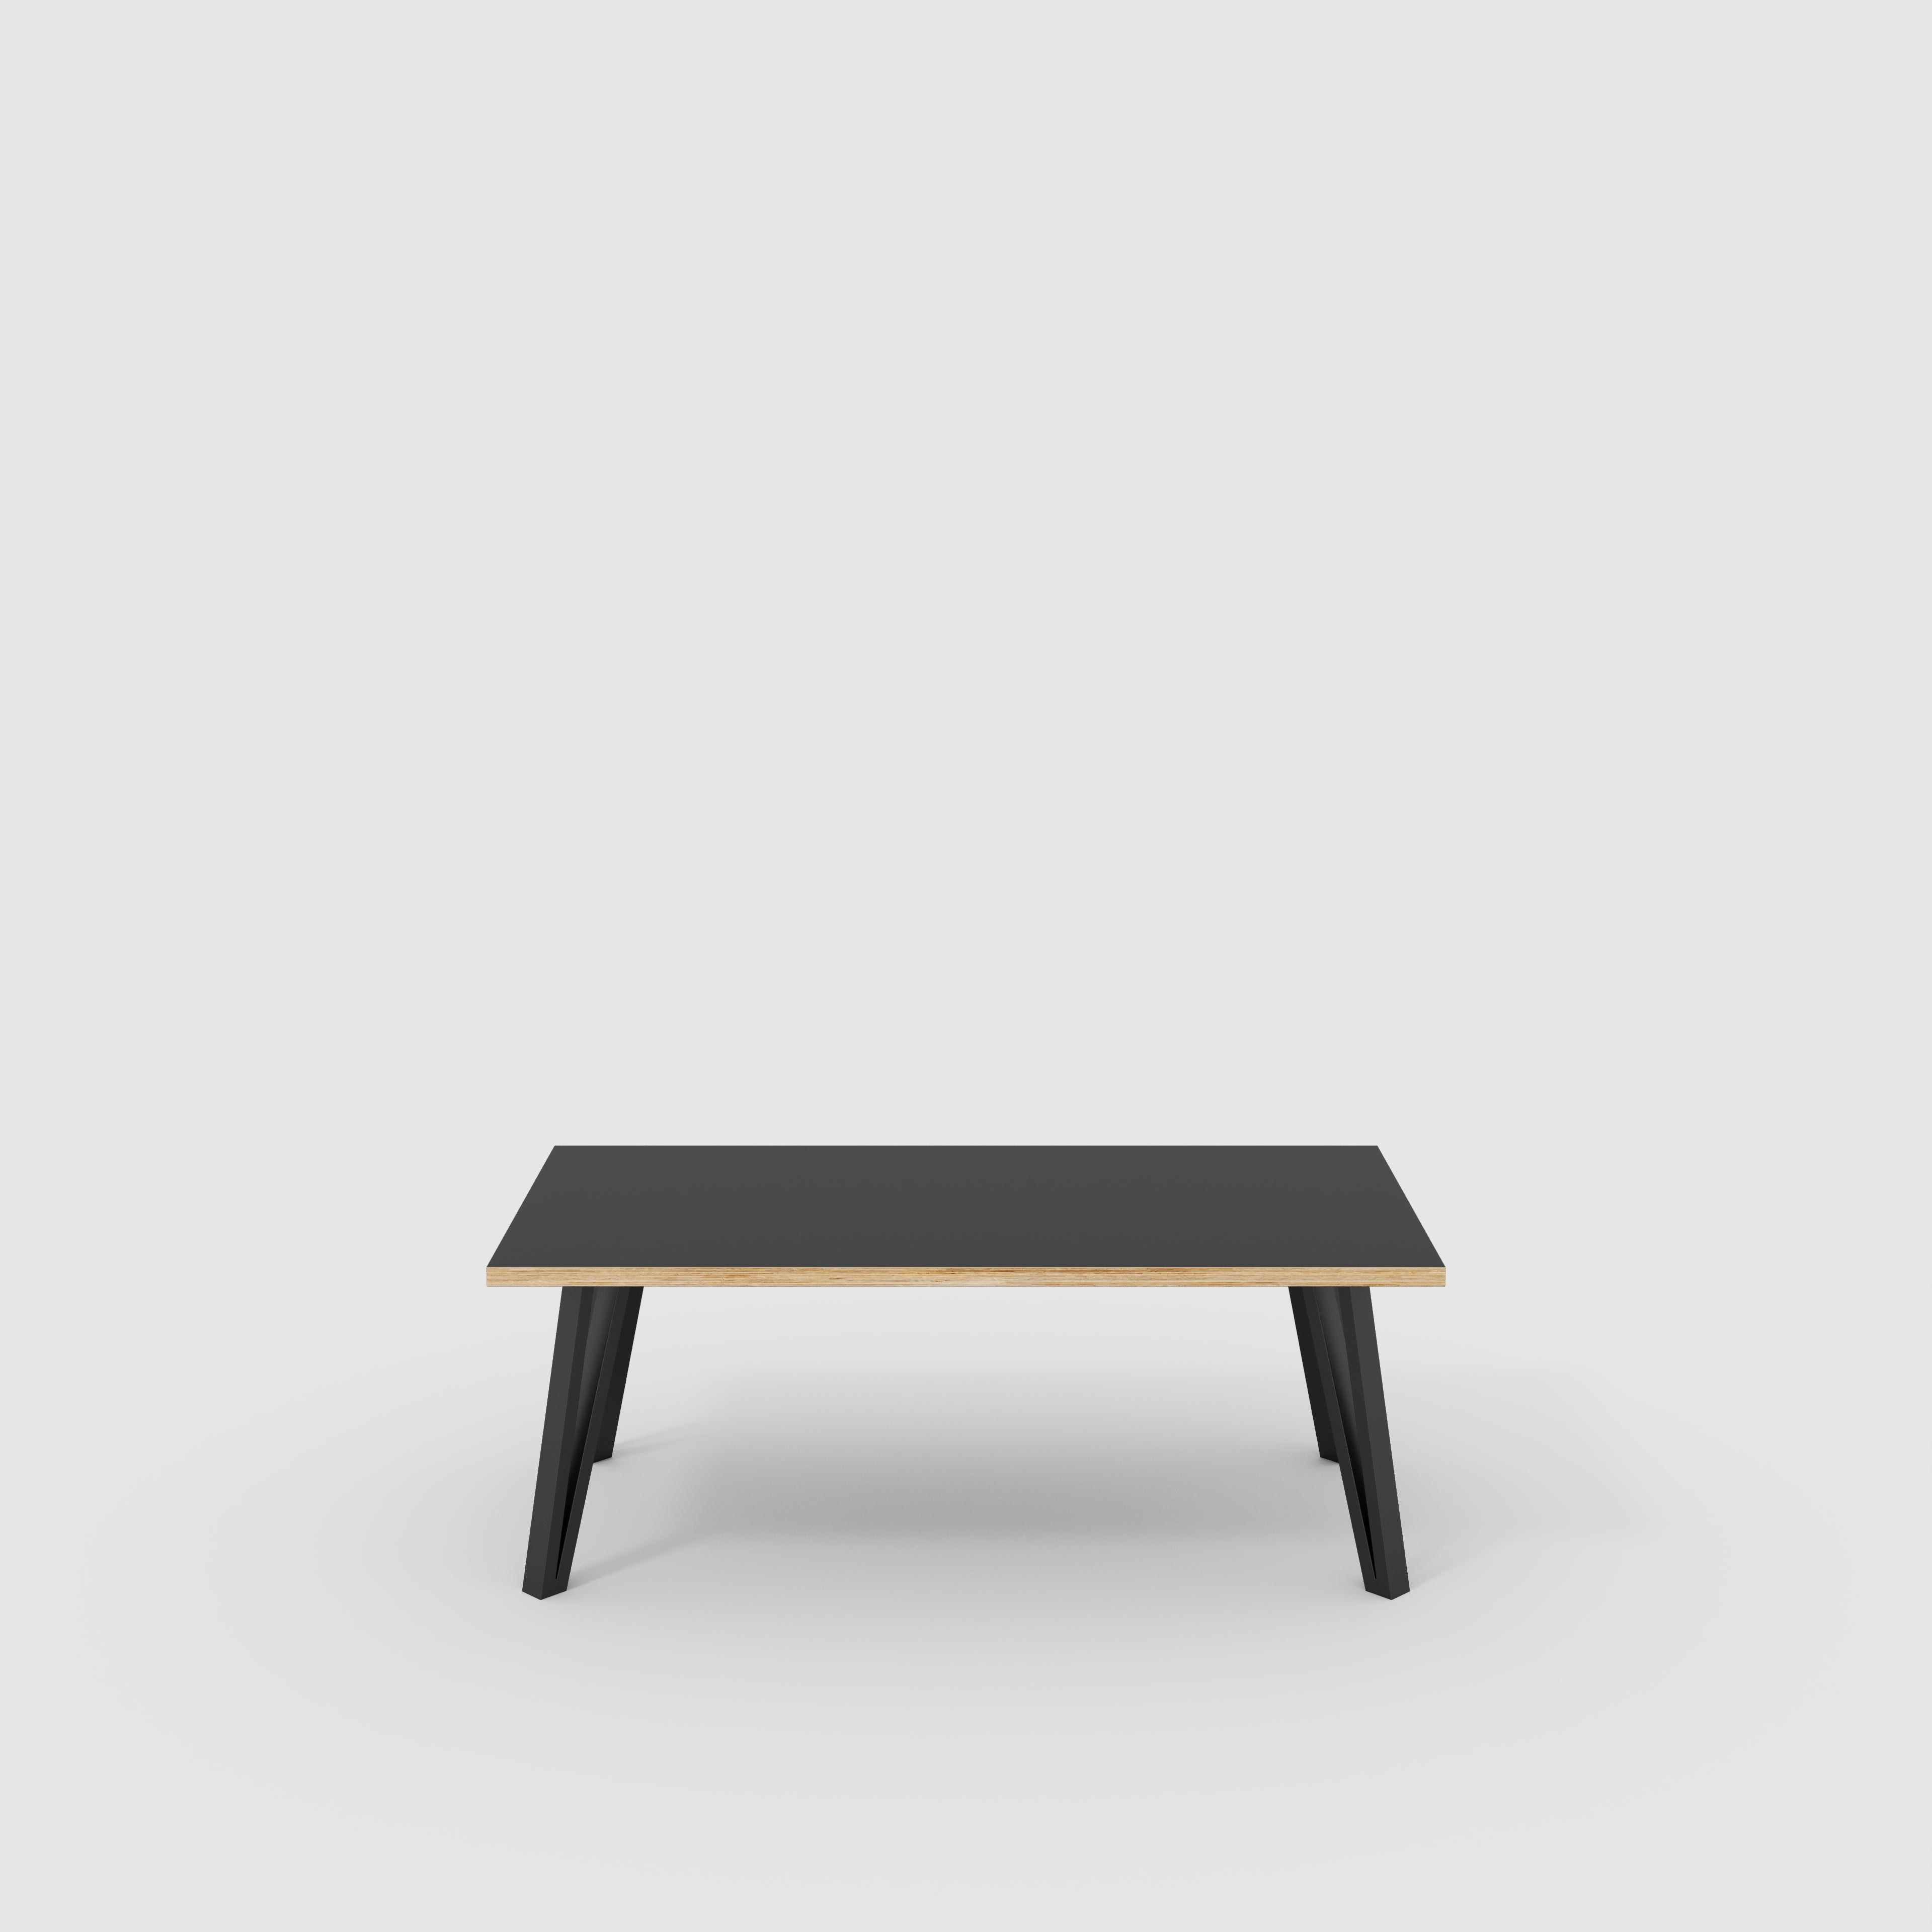 Coffee Table with Black Box Hairpin Legs - Formica Diamond Black - 1200(w) x 600(d) x 425(h)